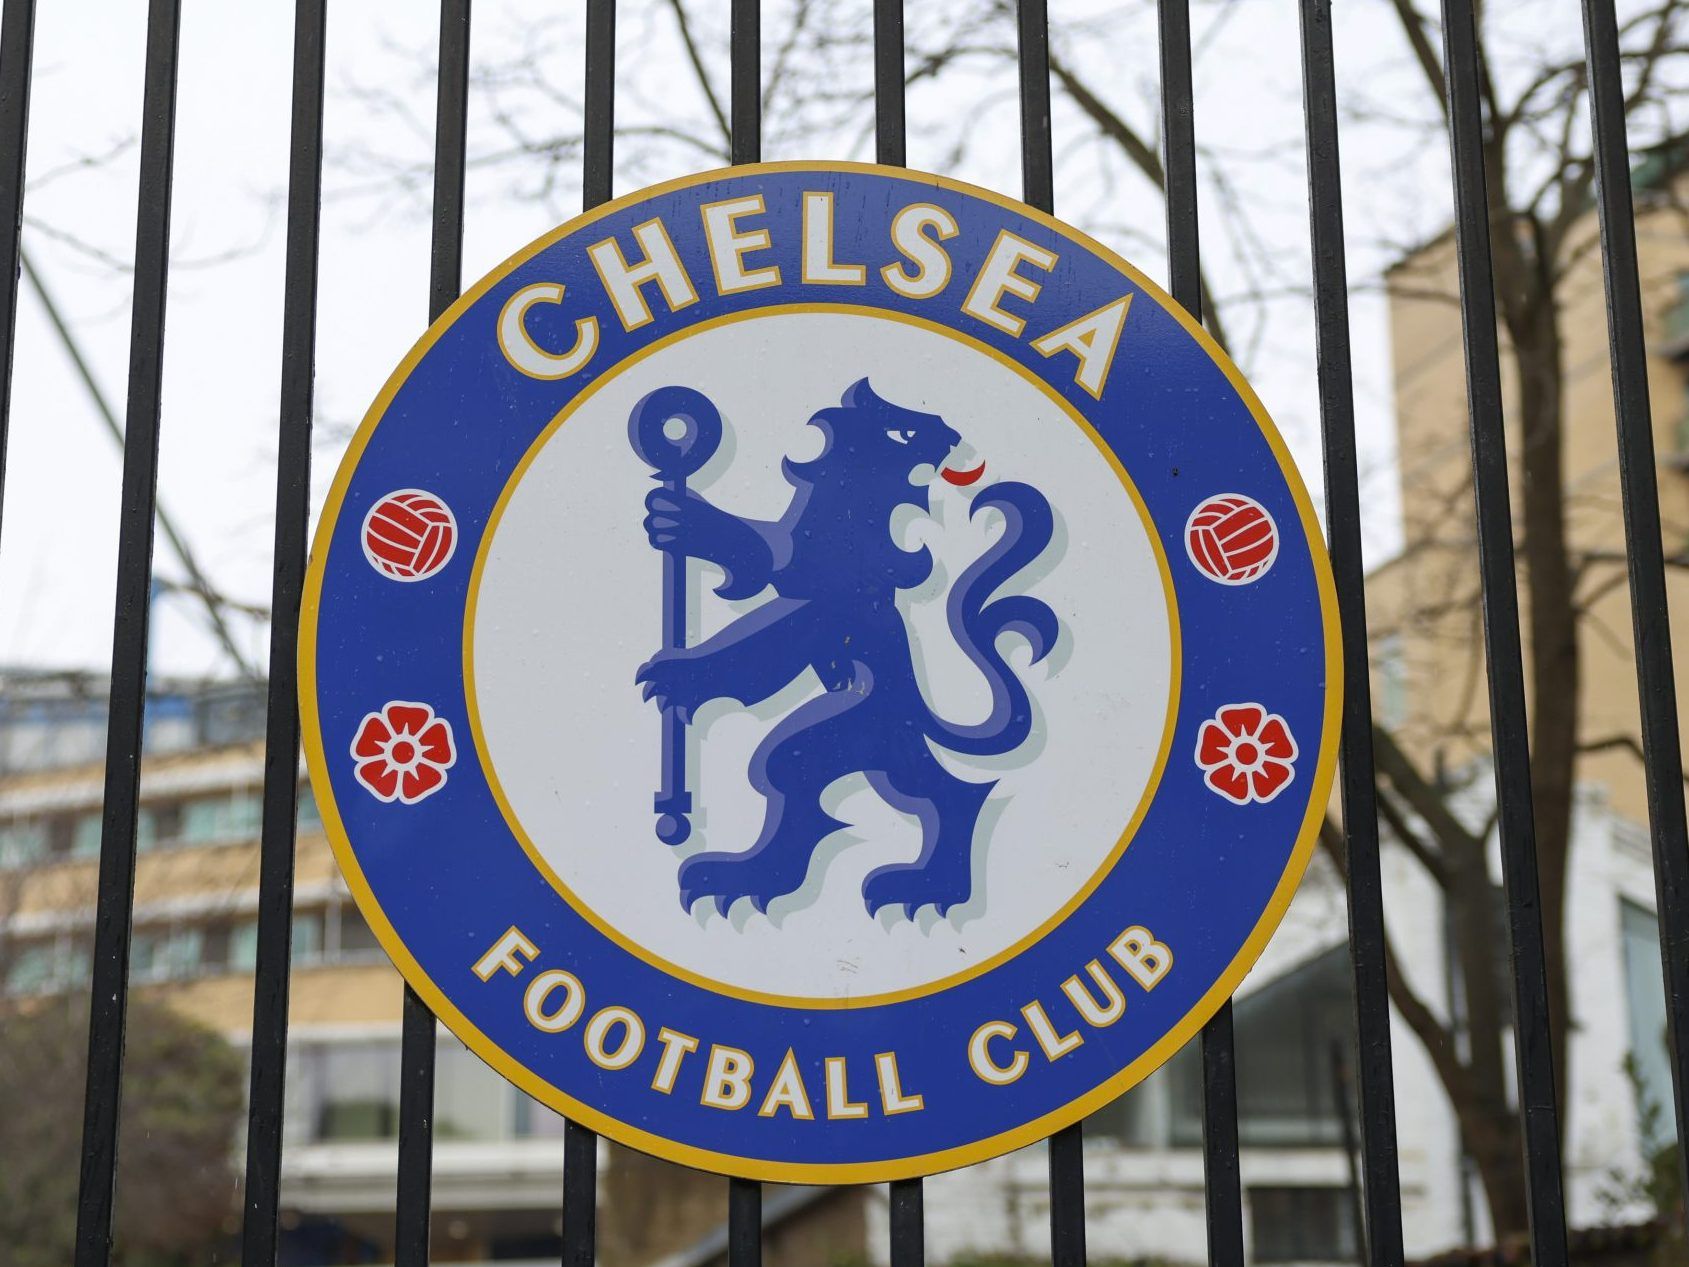 Chelsea FC Bidders Wait on Sale Process With New Offer Reported - Bloomberg